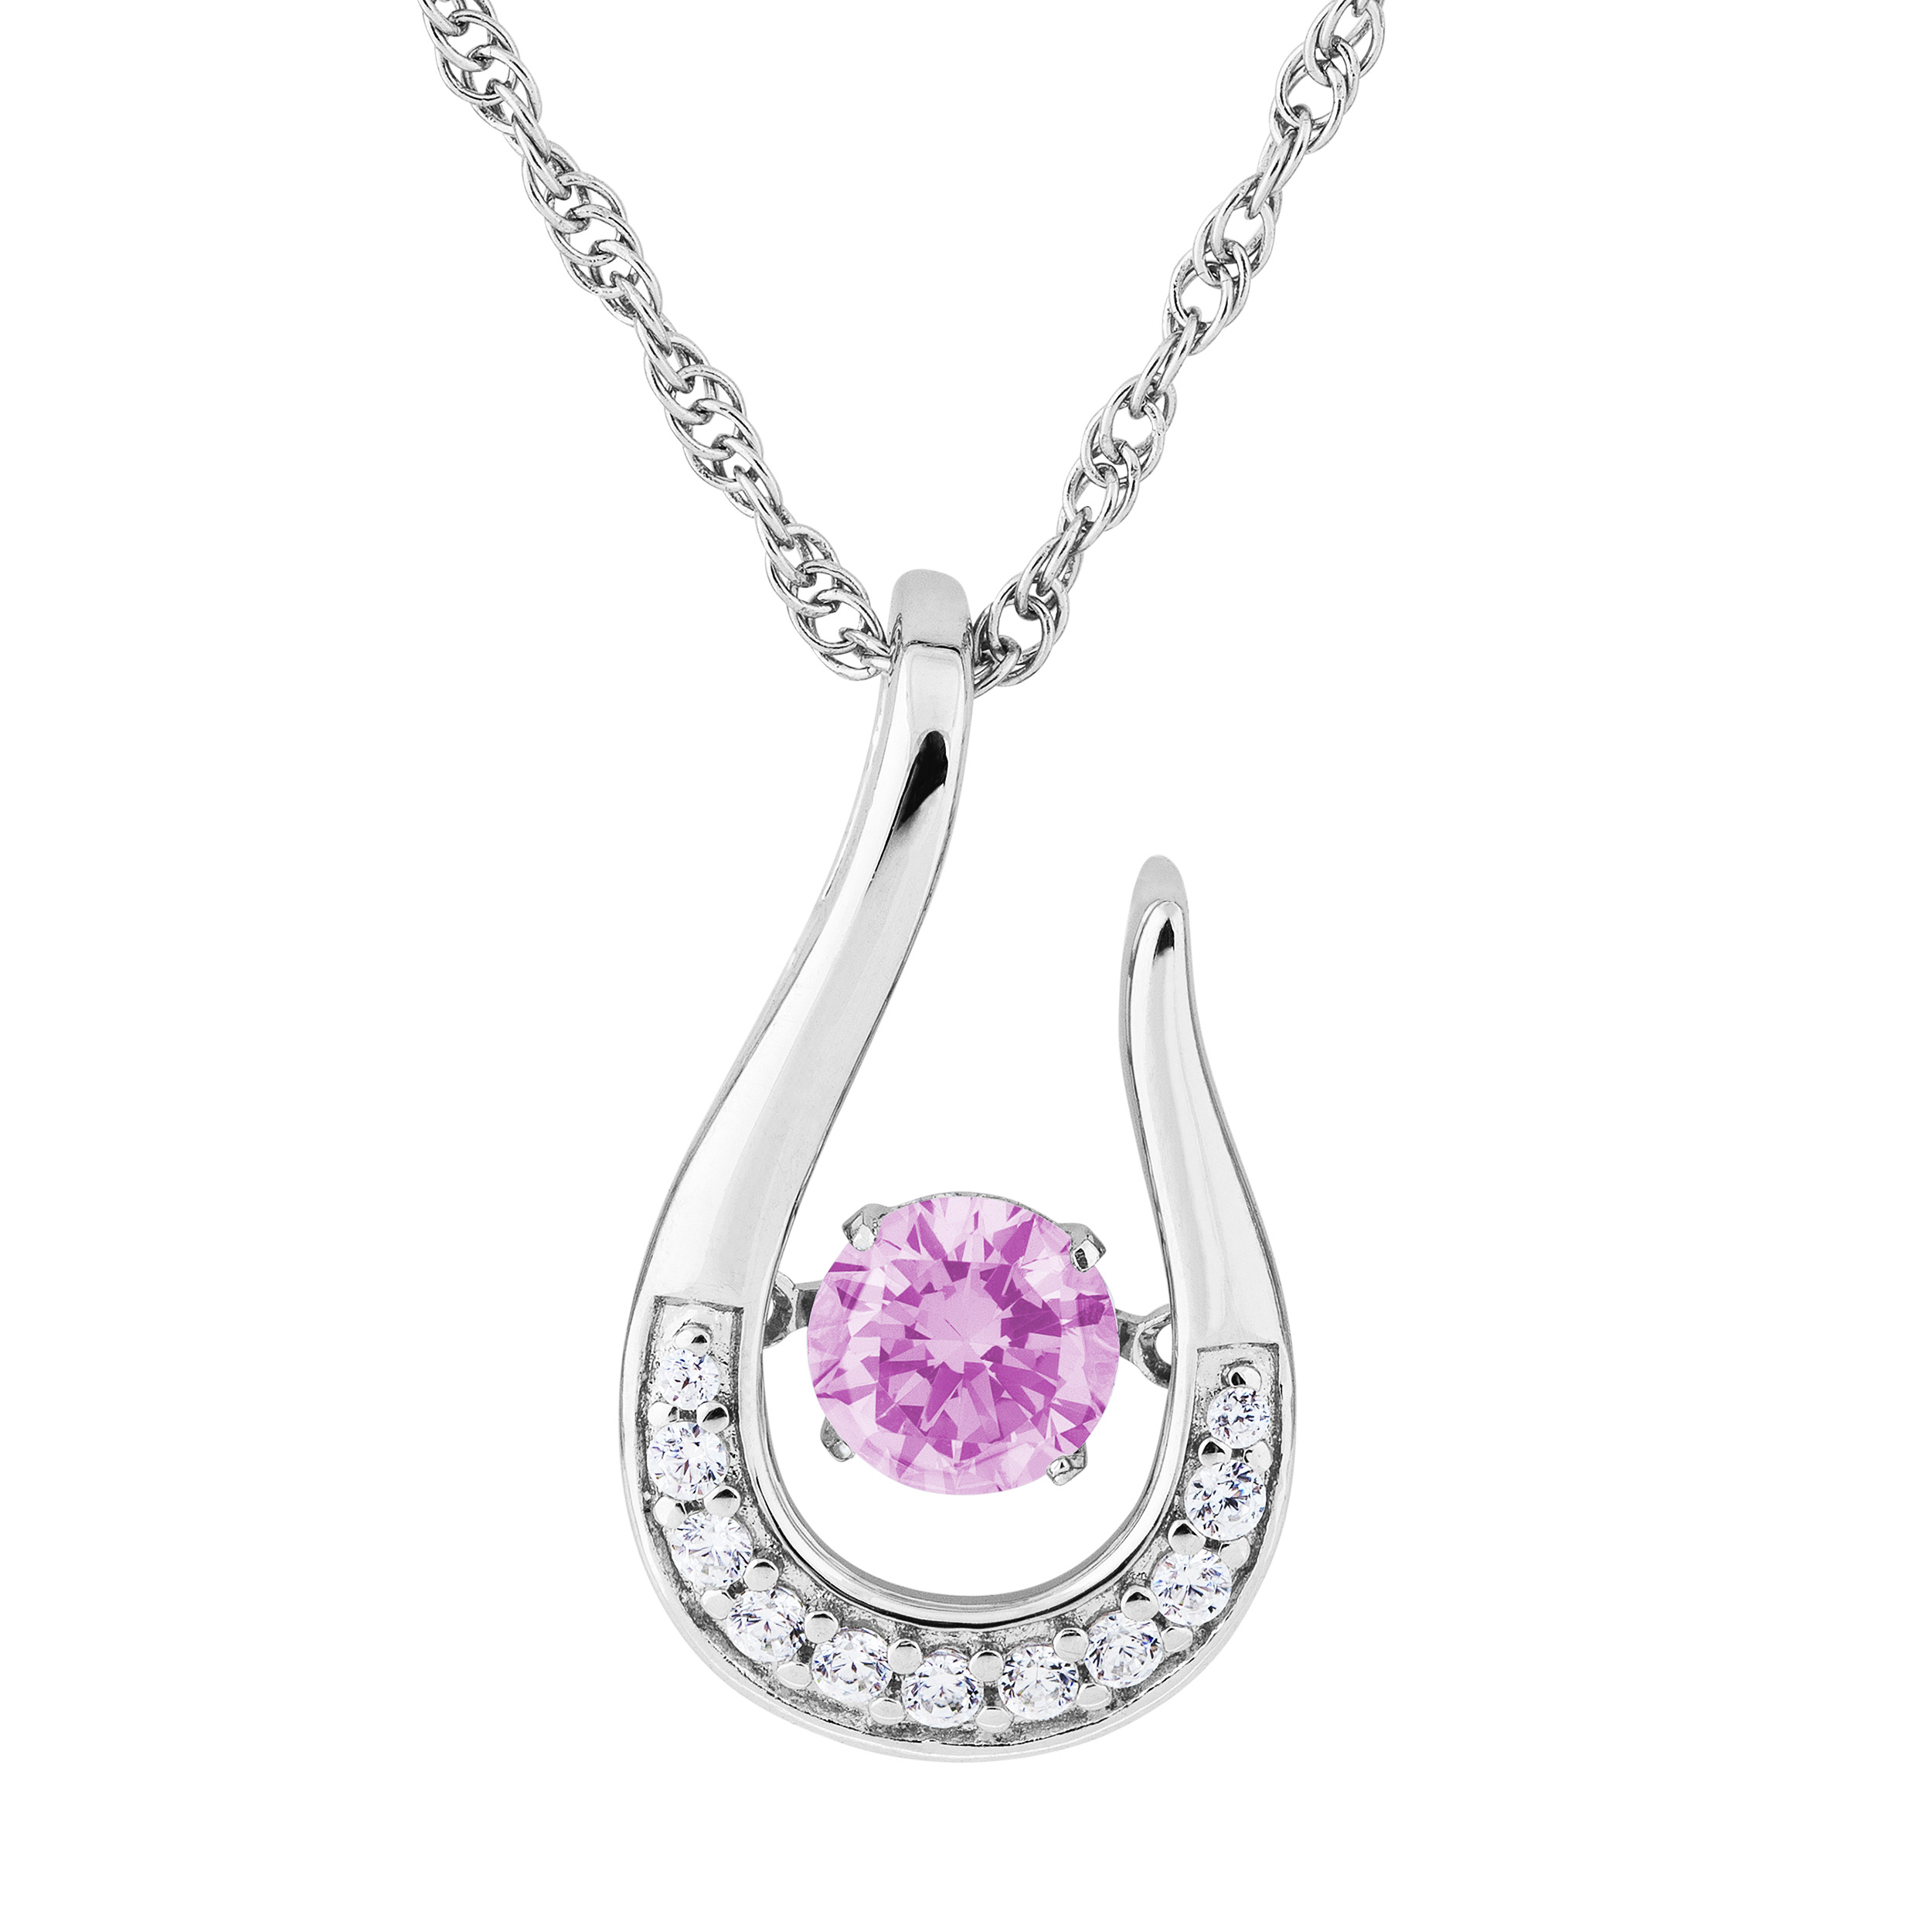 Pink CZ with Cubic Zirconia October Teardrop Pendant Necklace, Rhodium Plated Sterling Silver